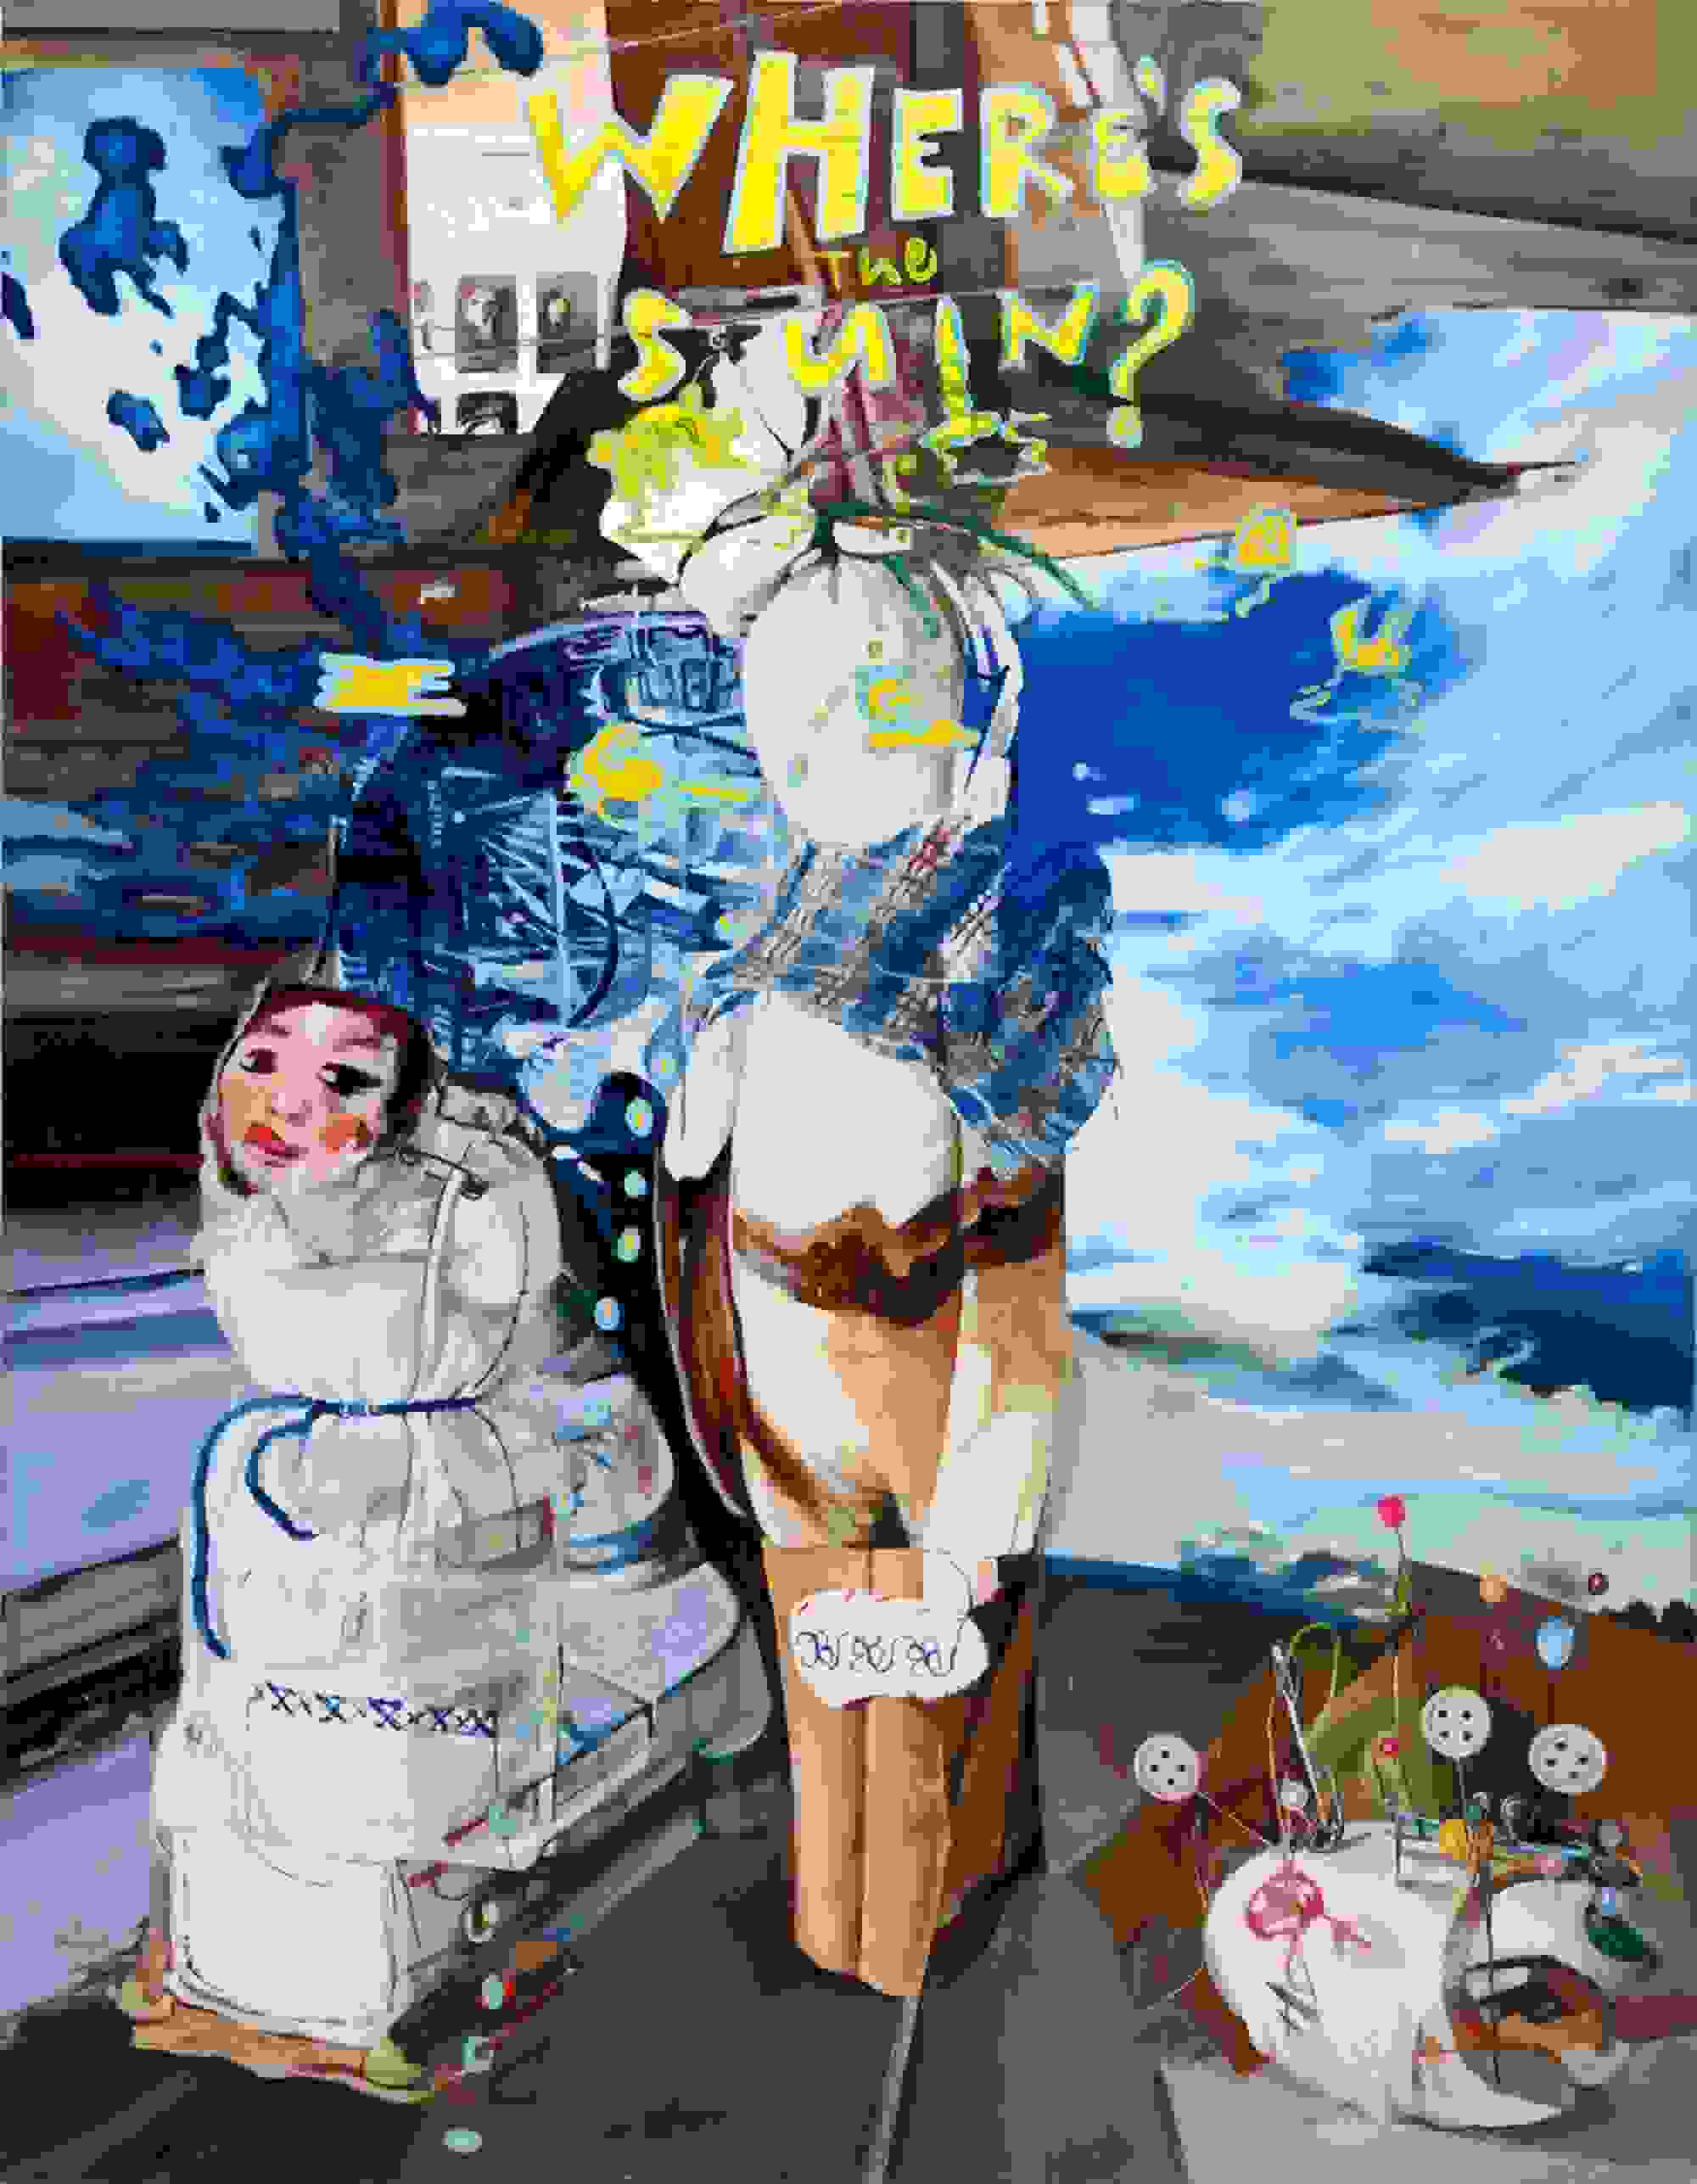 A painting of an obfuscated still life, featuring the face of a doll, a pin cushion, and other items.